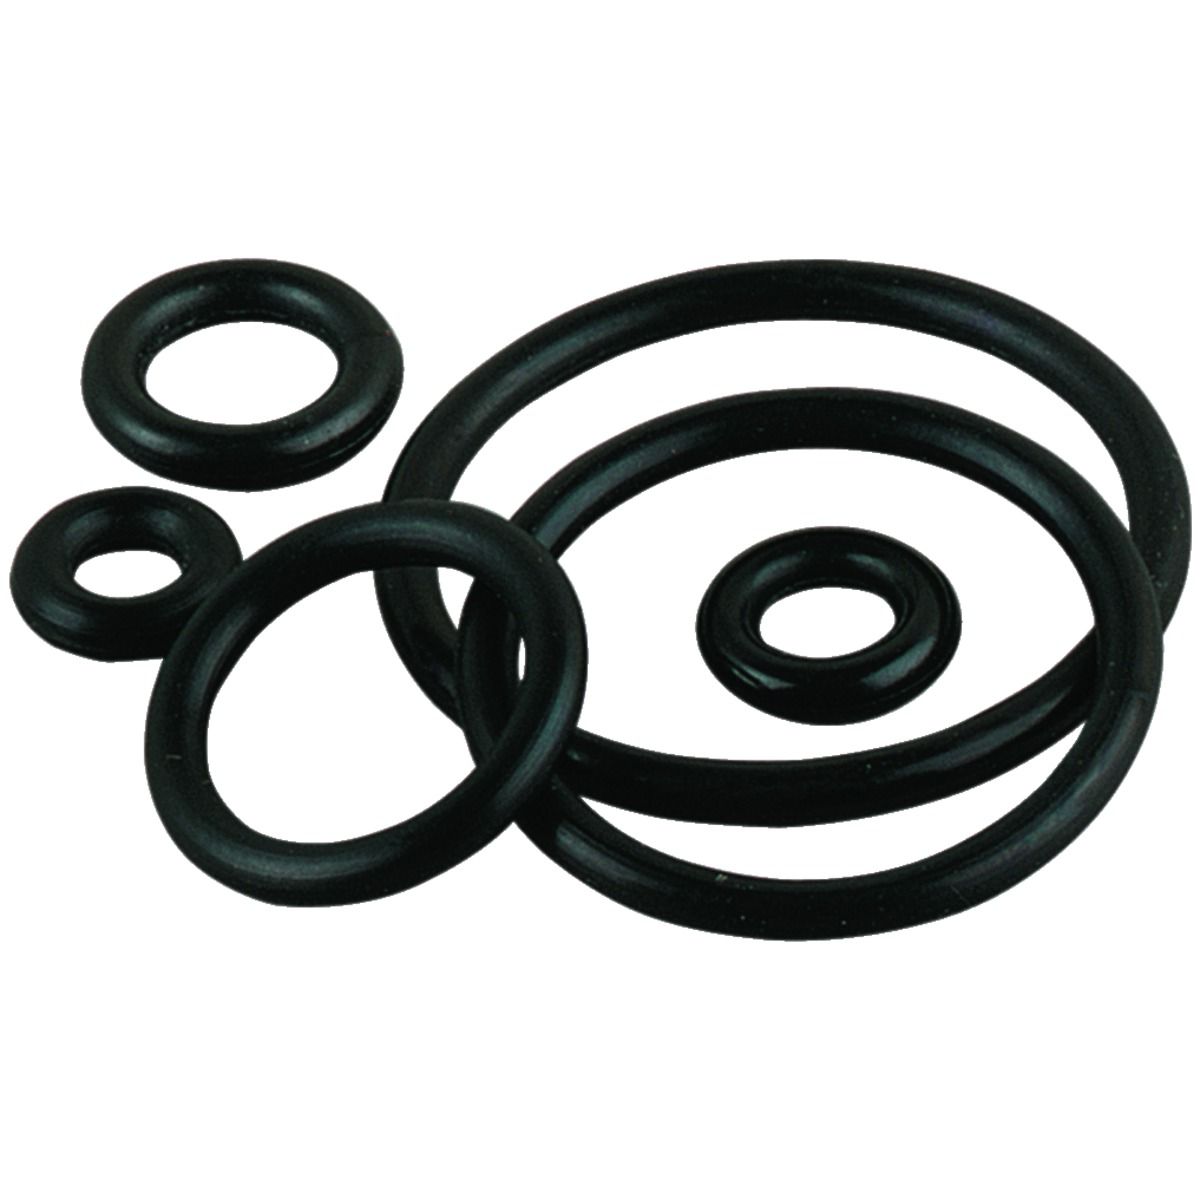 Primaflow Assorted O Rings 1.6mm Selection Pack